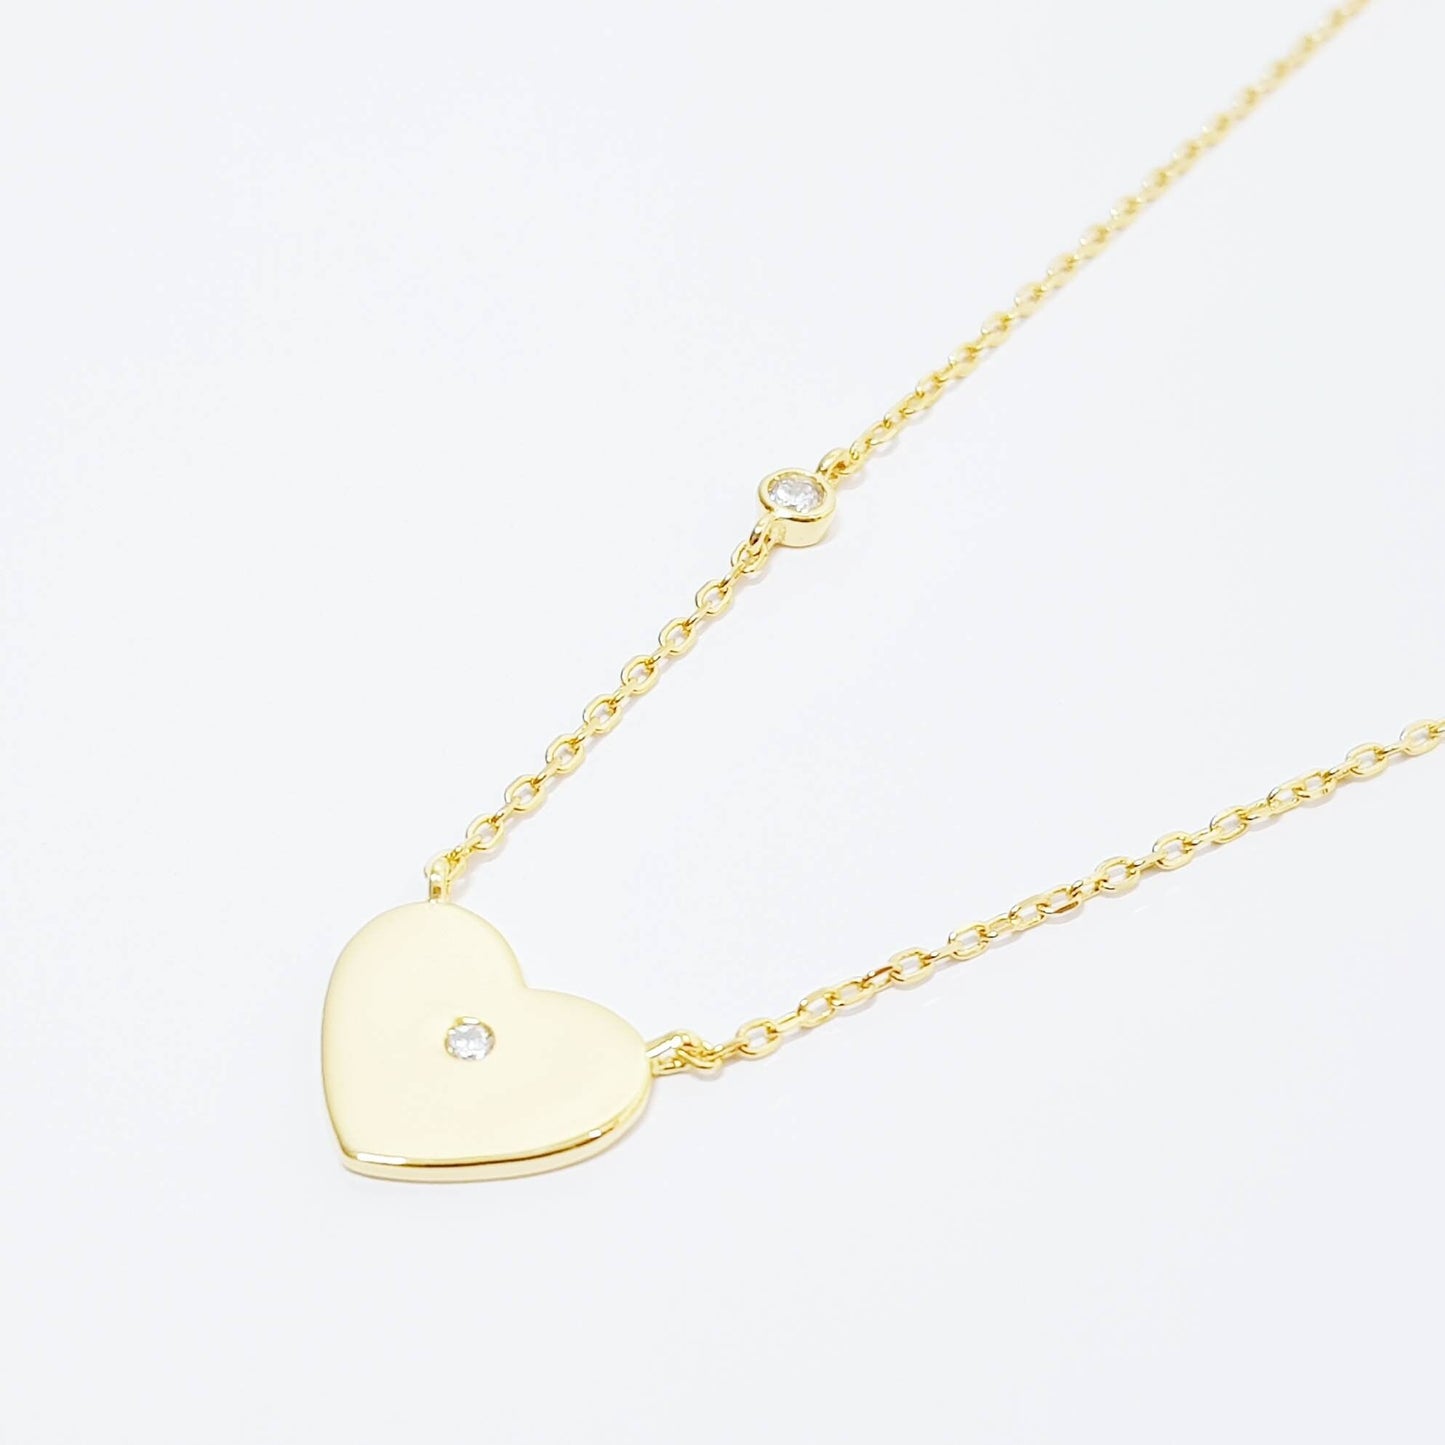 Delicate heart necklace, yellow gold plated love pendant